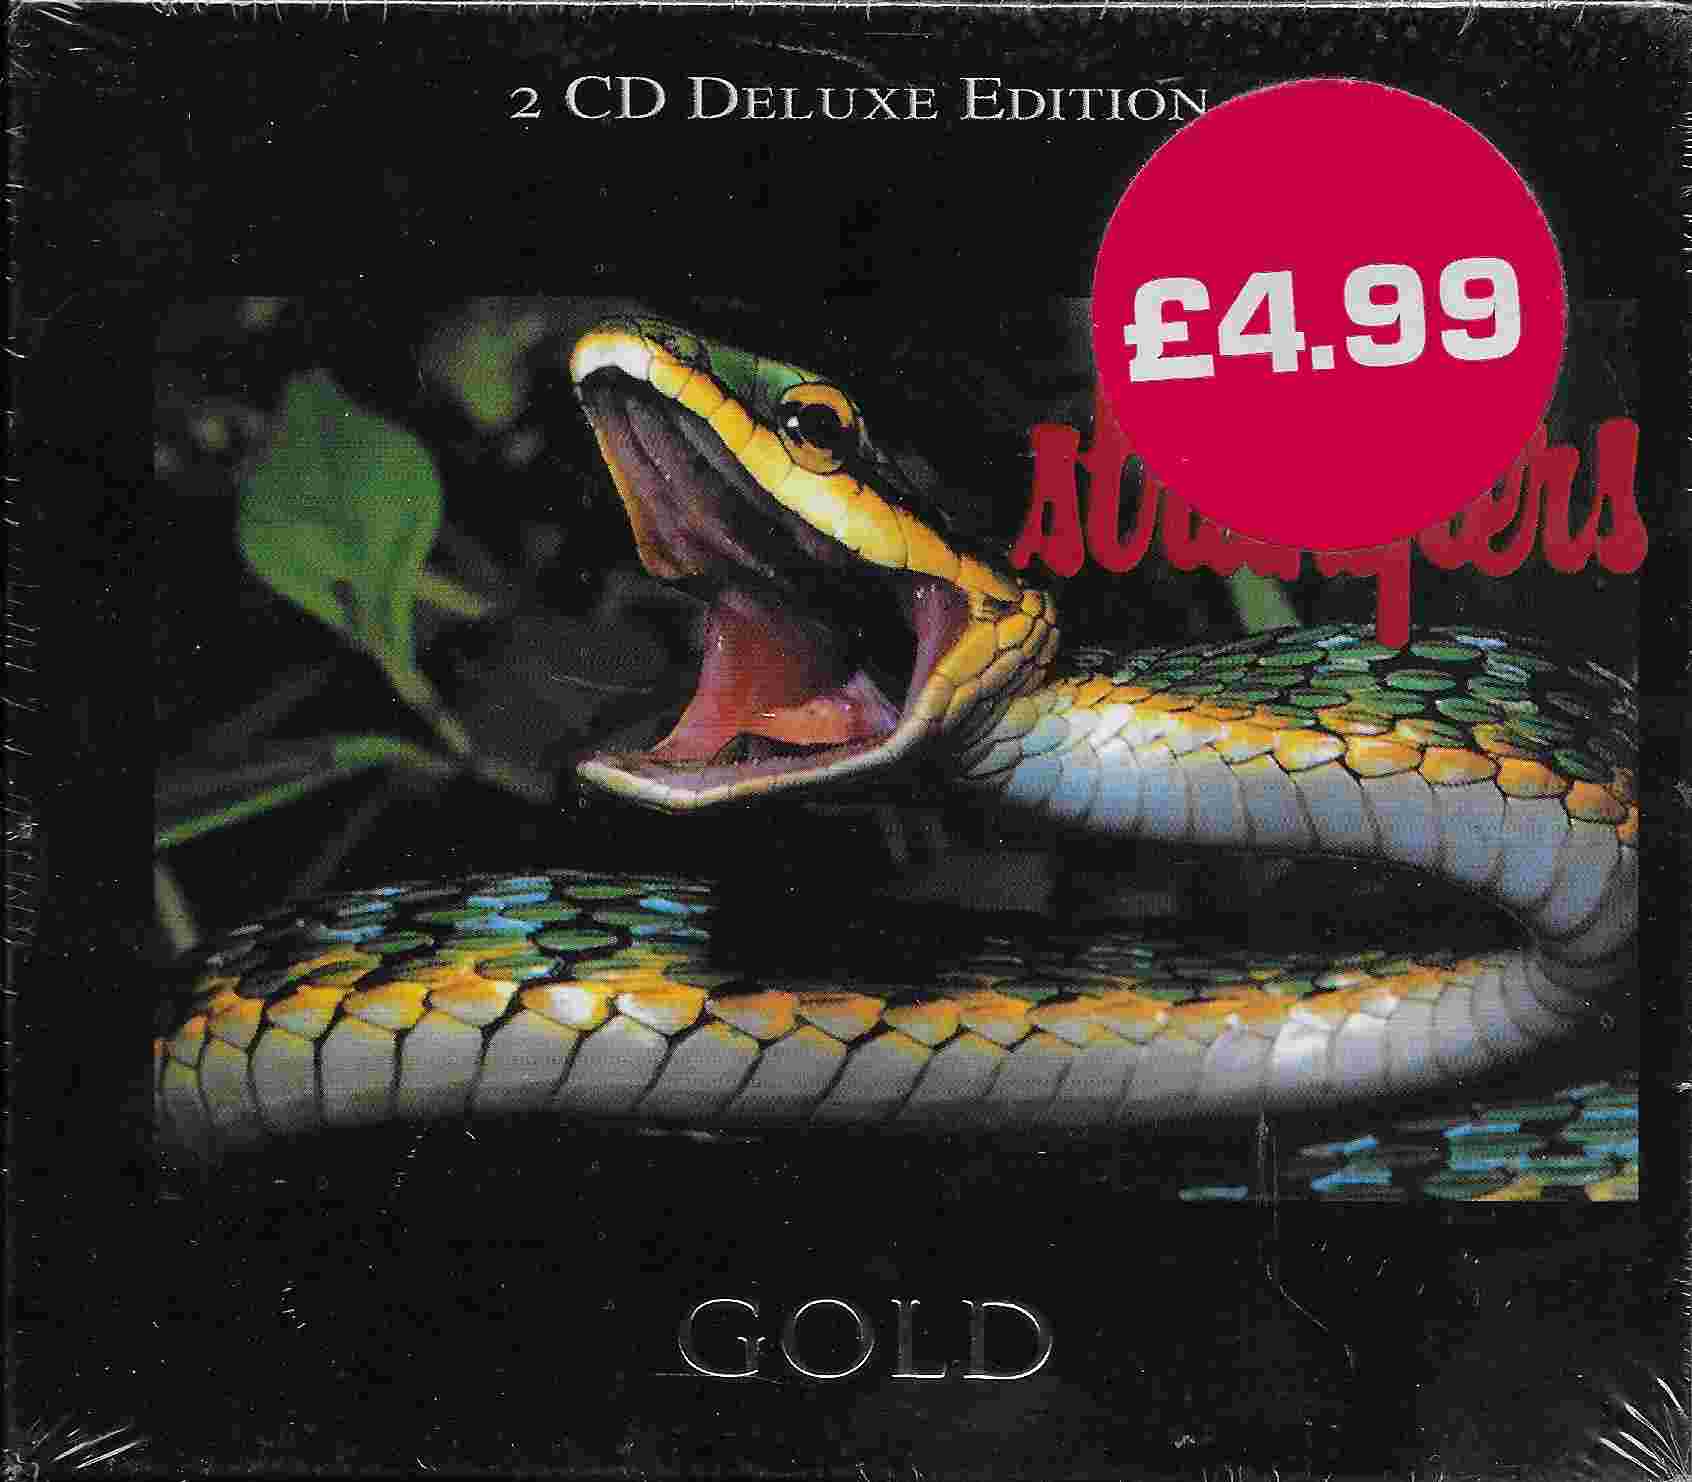 Picture of R2CD 42-57 Gold by artist The Stranglers